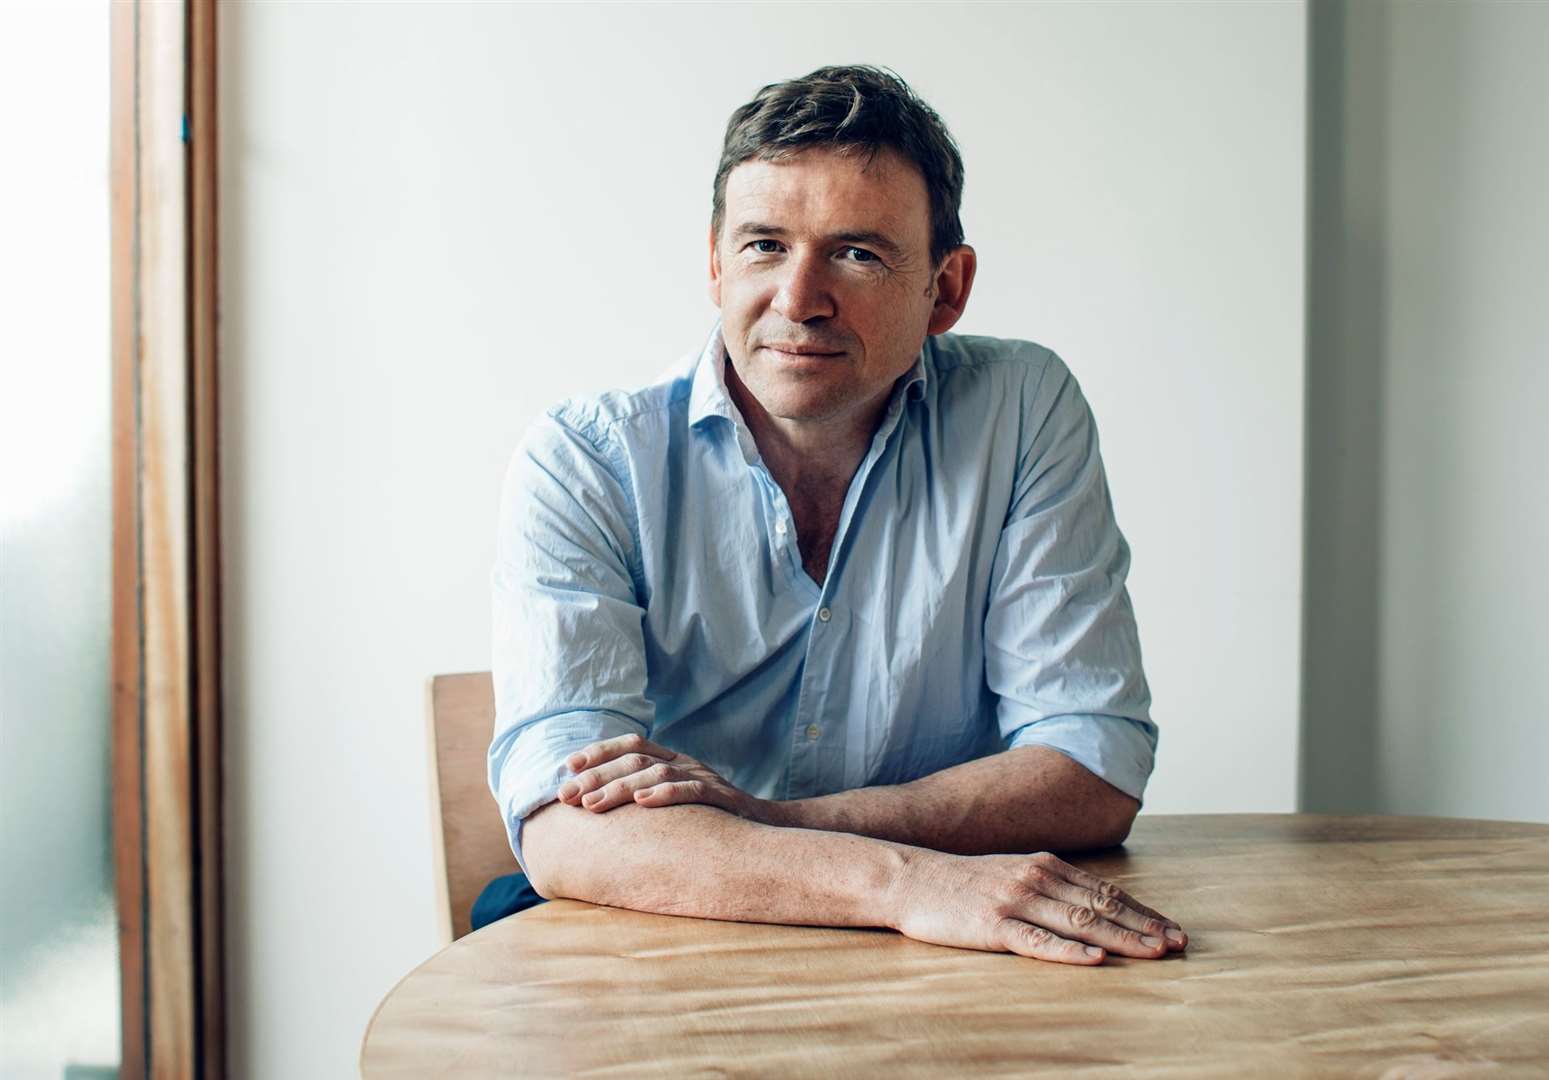 Best-selling author David Nicholls is set to promote his new book, You Are Here, in Sevenoaks. Picture: Sophia Spring/PA